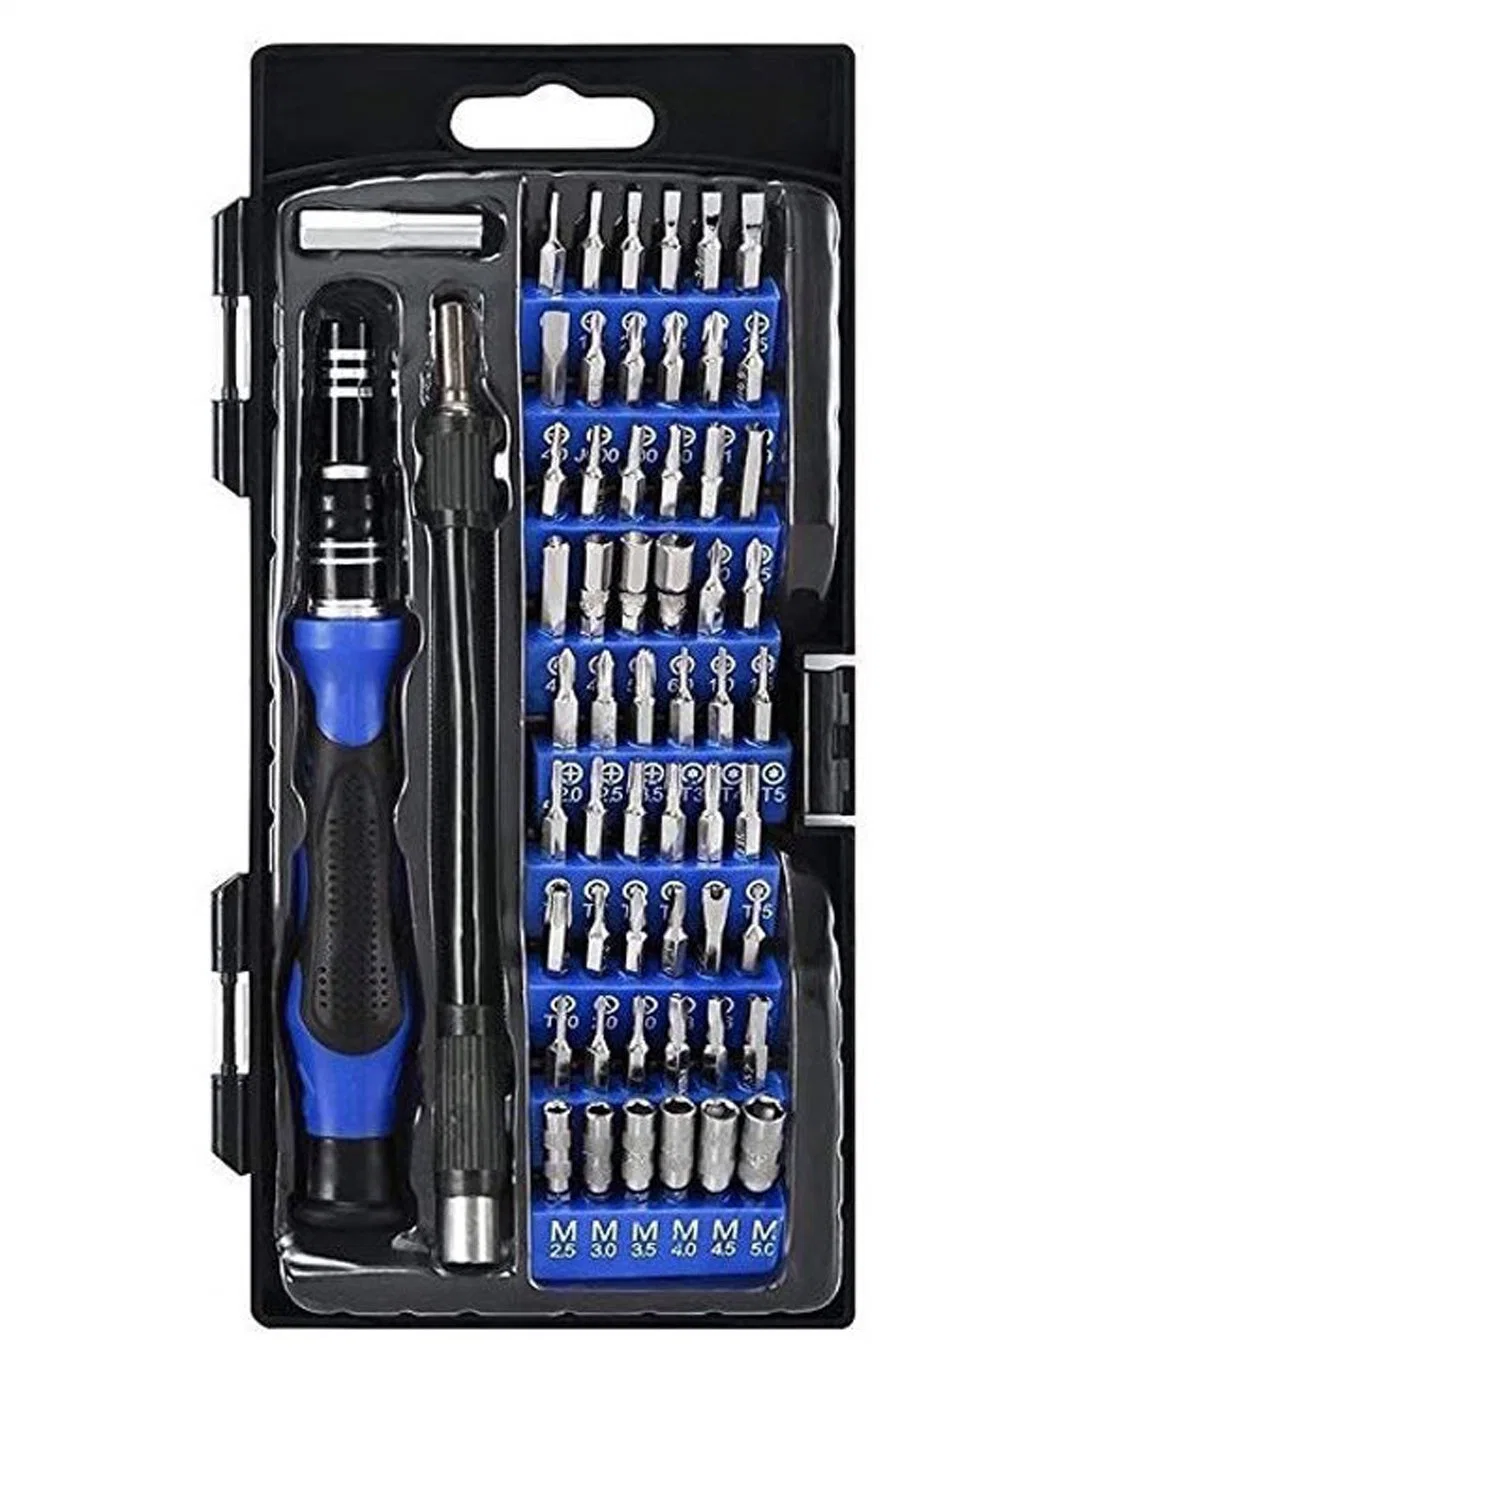 Precision Screwdriver Sets with 58 Bits Screwdriver Set Magnetic Driver Kit with Flexible Shaft Extension Rod for Mobile Phone Smartphone Game Console